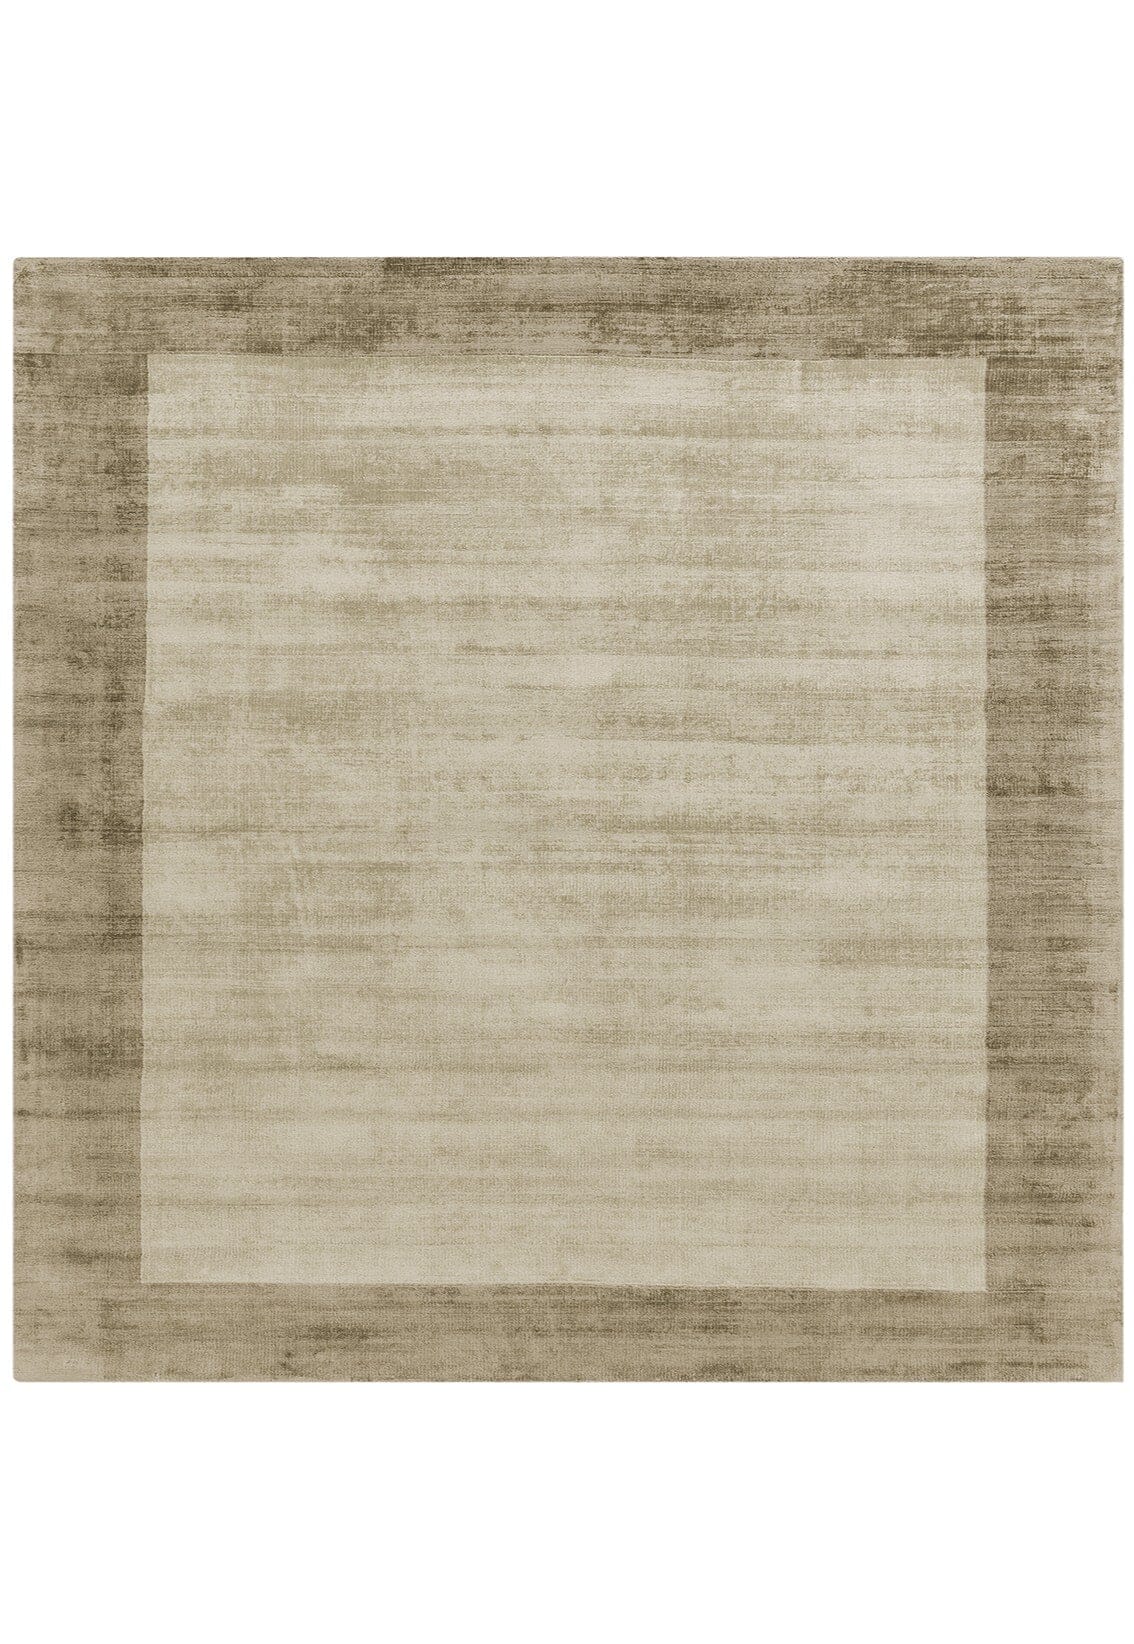 Asiatic Carpets Blade Hand Woven Rug Smoke Putty - 160 x 230cm